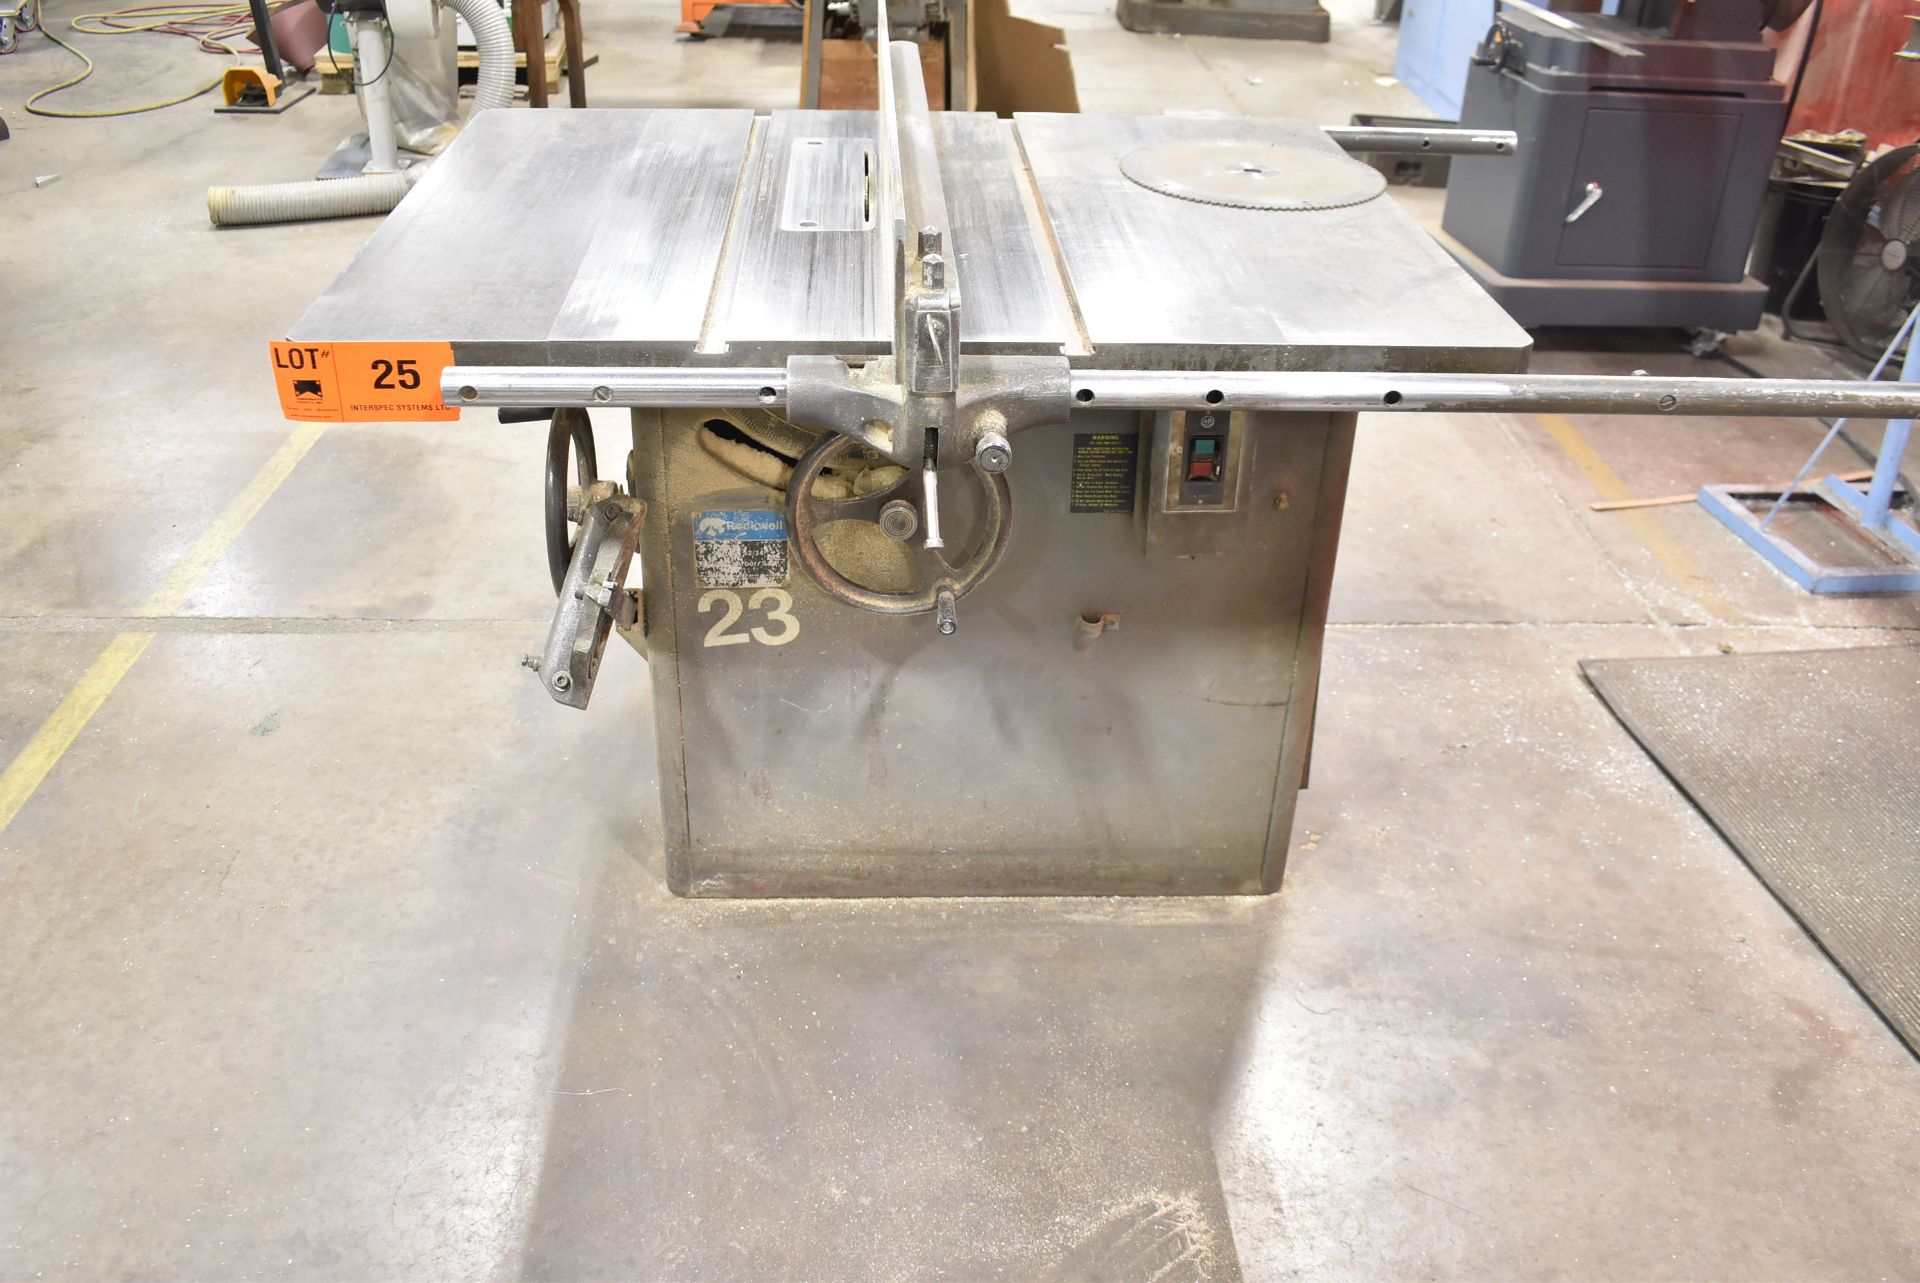 ROCKWELL 34-395 12" TABLE SAW S/N 1770023 (CI) [RIGGING FOR FOR LOT #25 - $50 CAD PLUS APPLICABLE